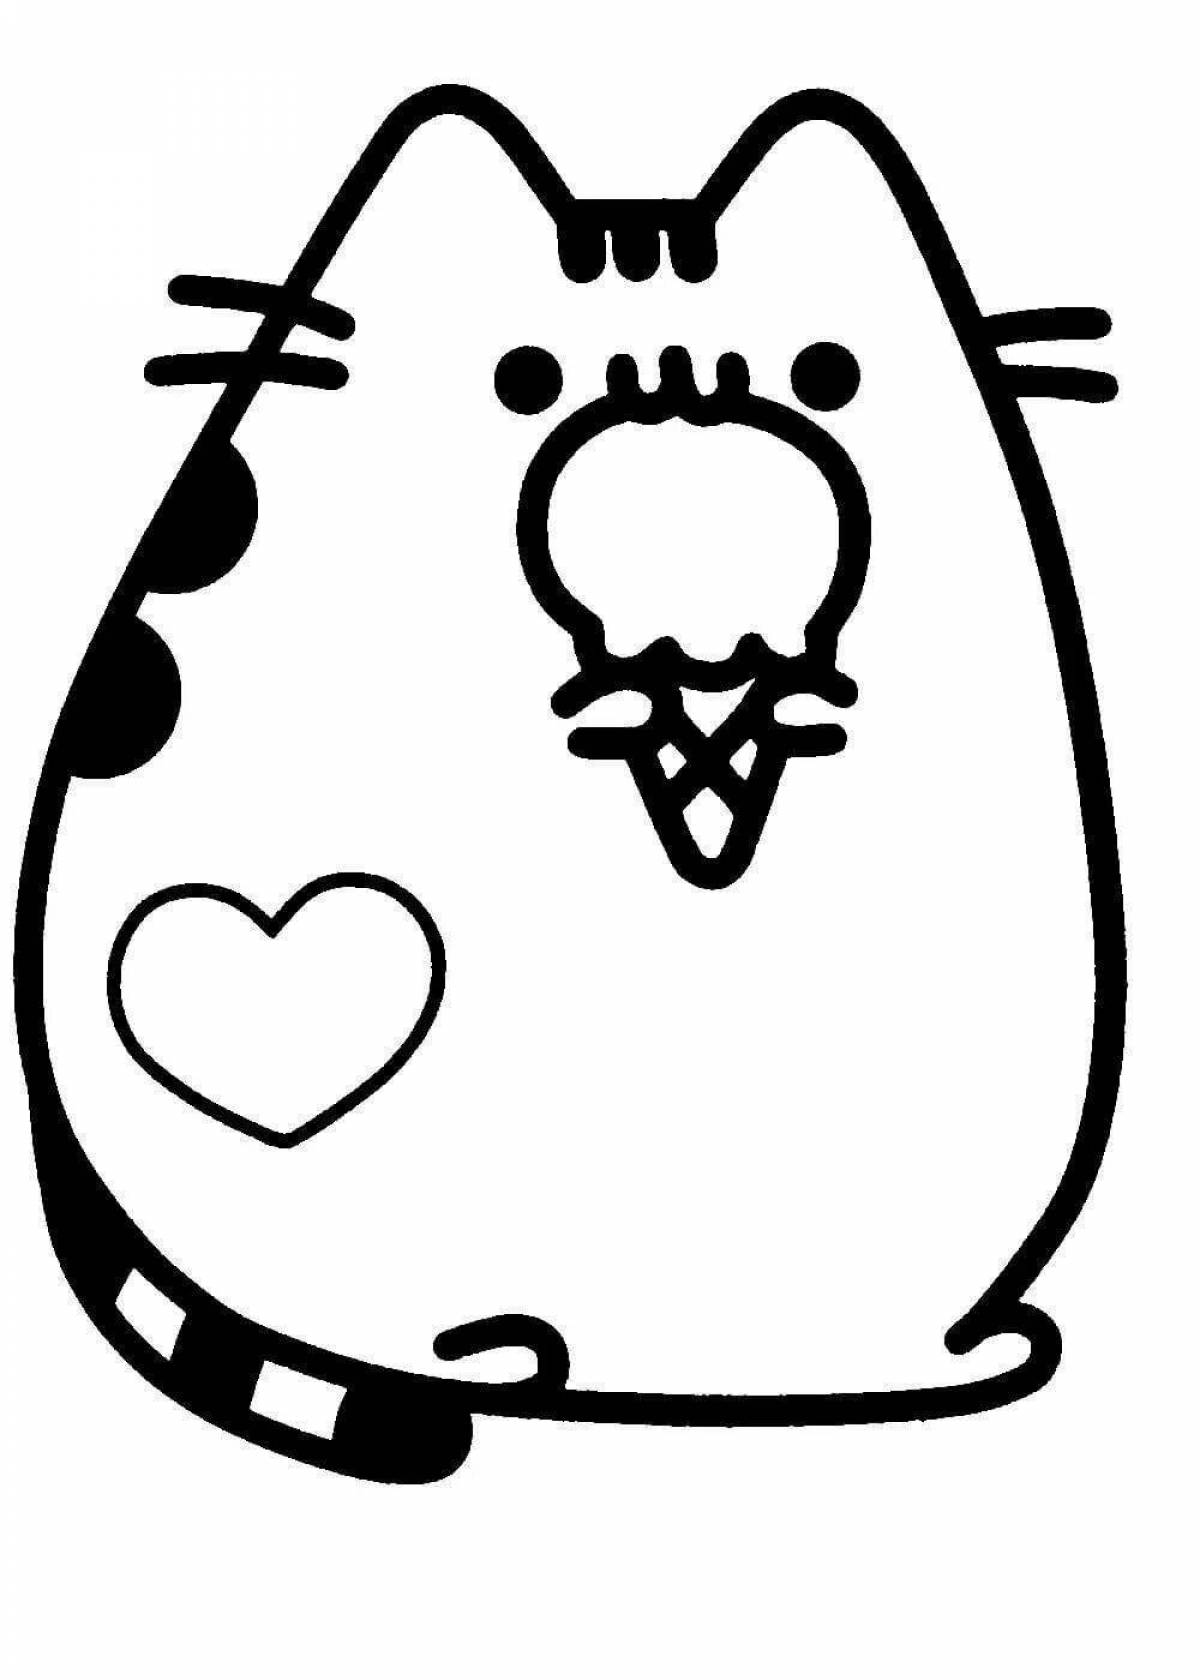 Sparkling pusheen coloring page for kids